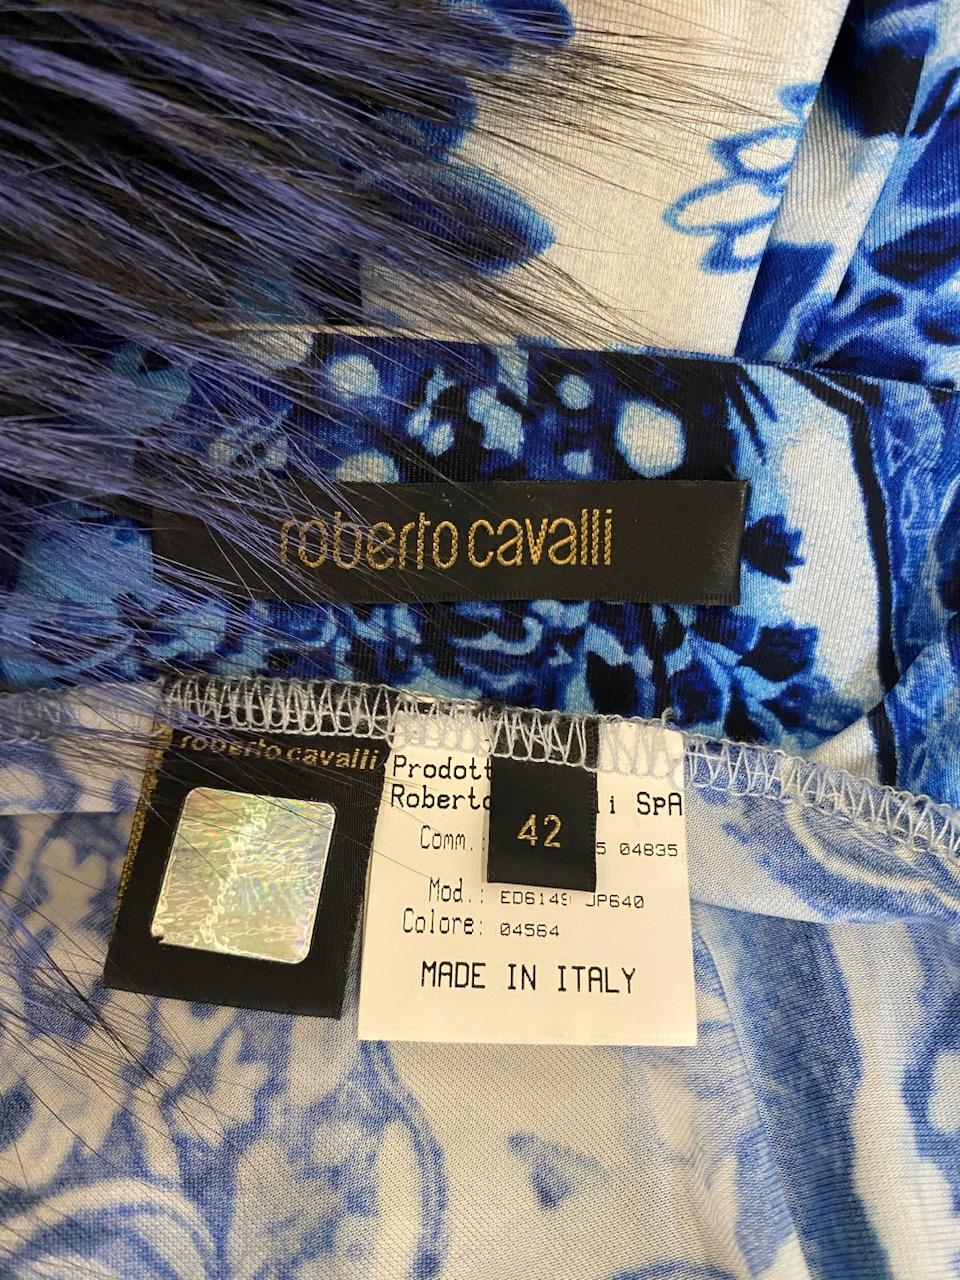 Roberto Cavalli Blue & White Ming Gown Dress with Fur Trim Wrap S/S 2005 Sz 42IT For Sale 1